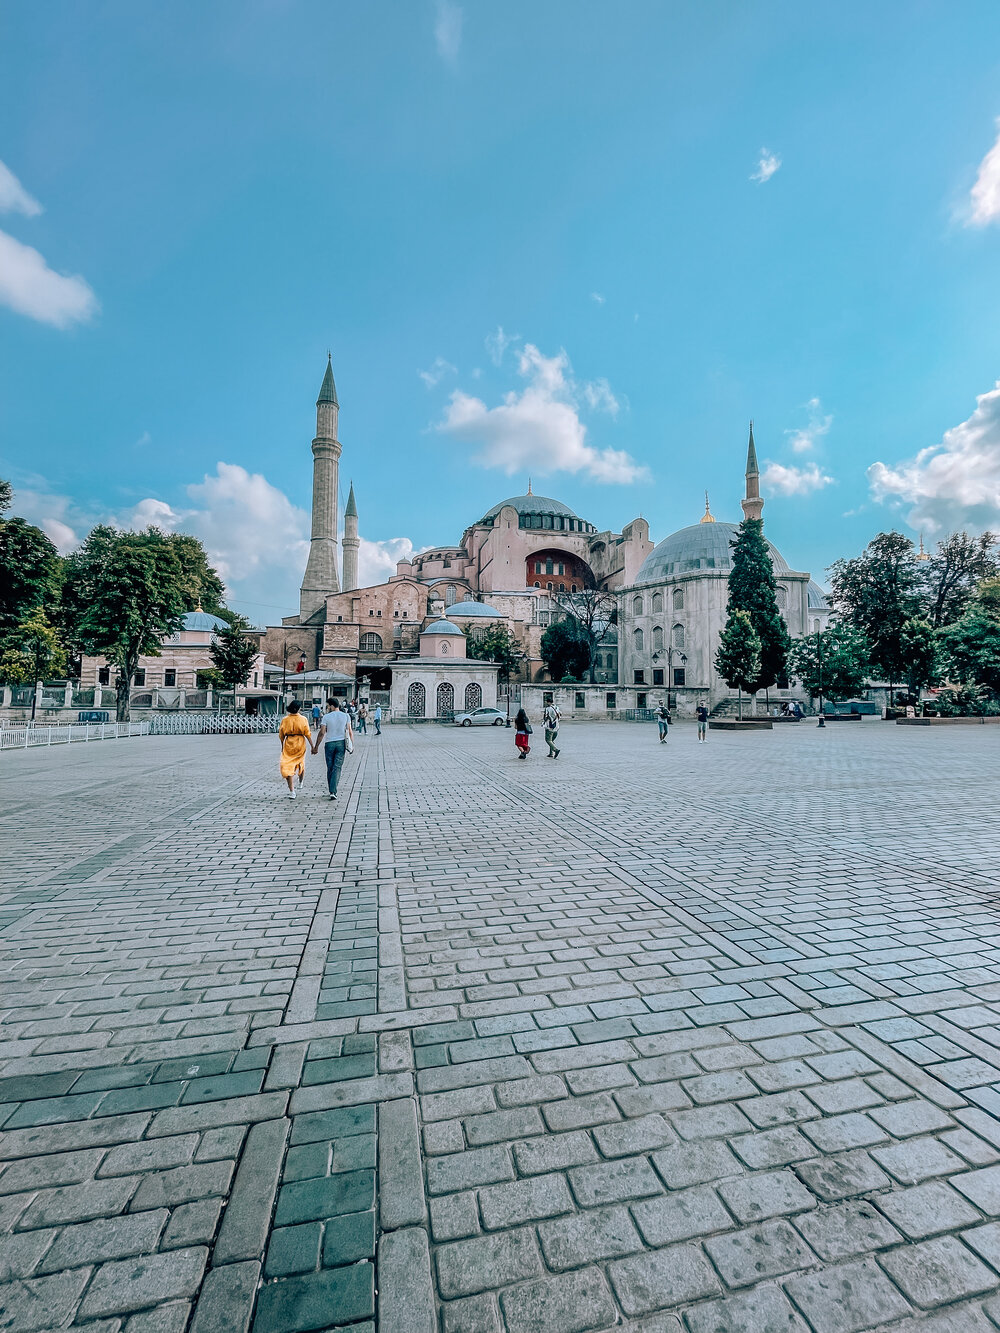 What to see in Istanbul - Hagia Sophia (Copy)